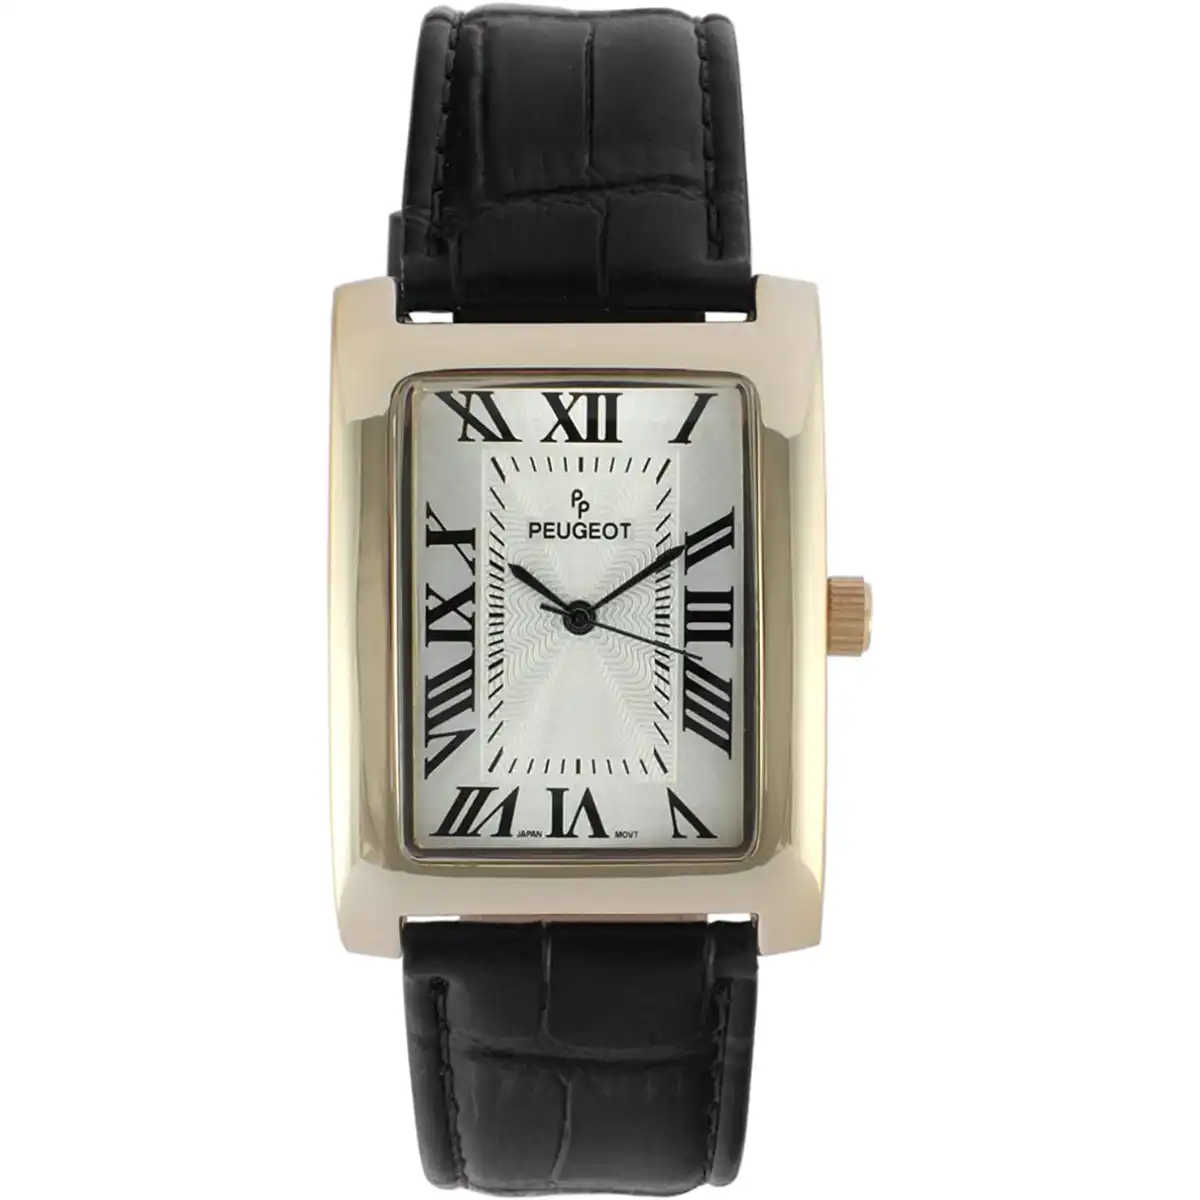 Cartier tank watch dupe amazon